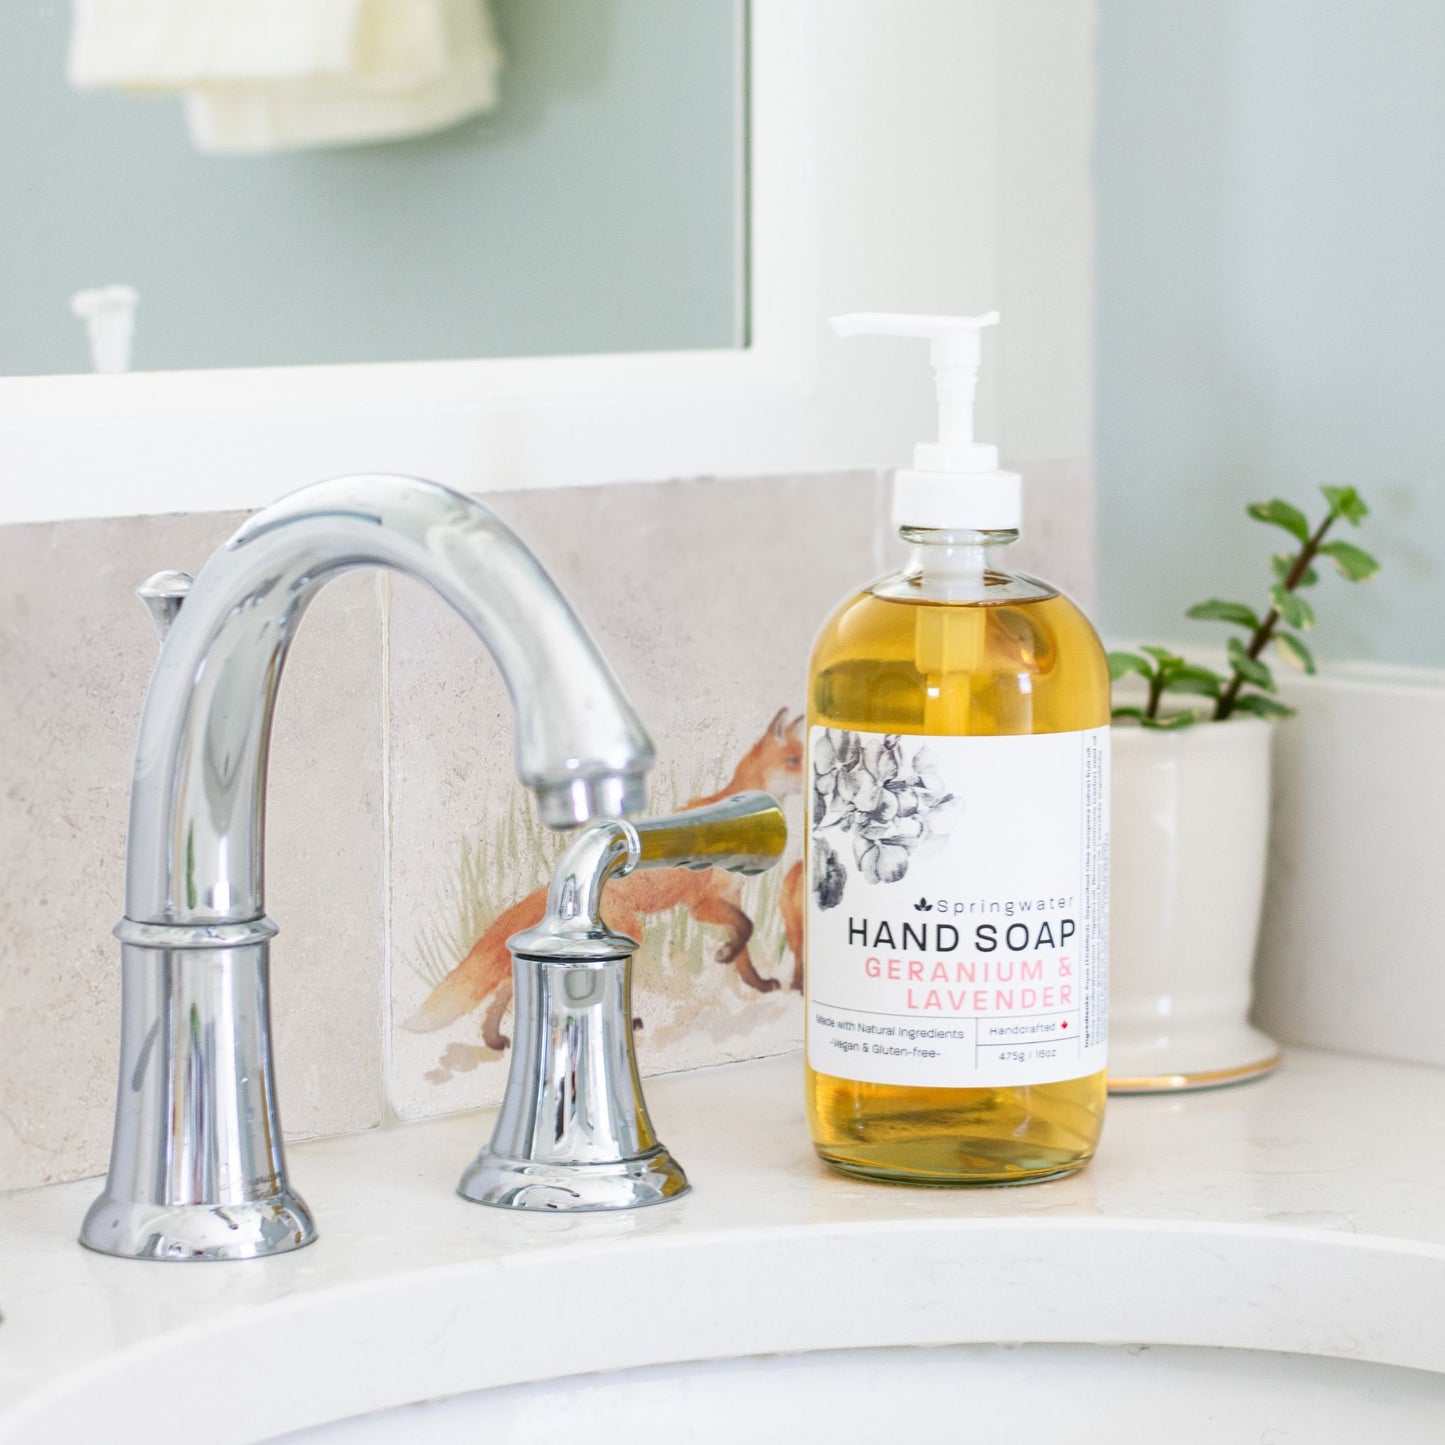 A tiled splashback behind a bathroom sink. The splashback is made up of plain cream marble tiles alternated with tiles featuring countryside scenes including a fox and fox cub.